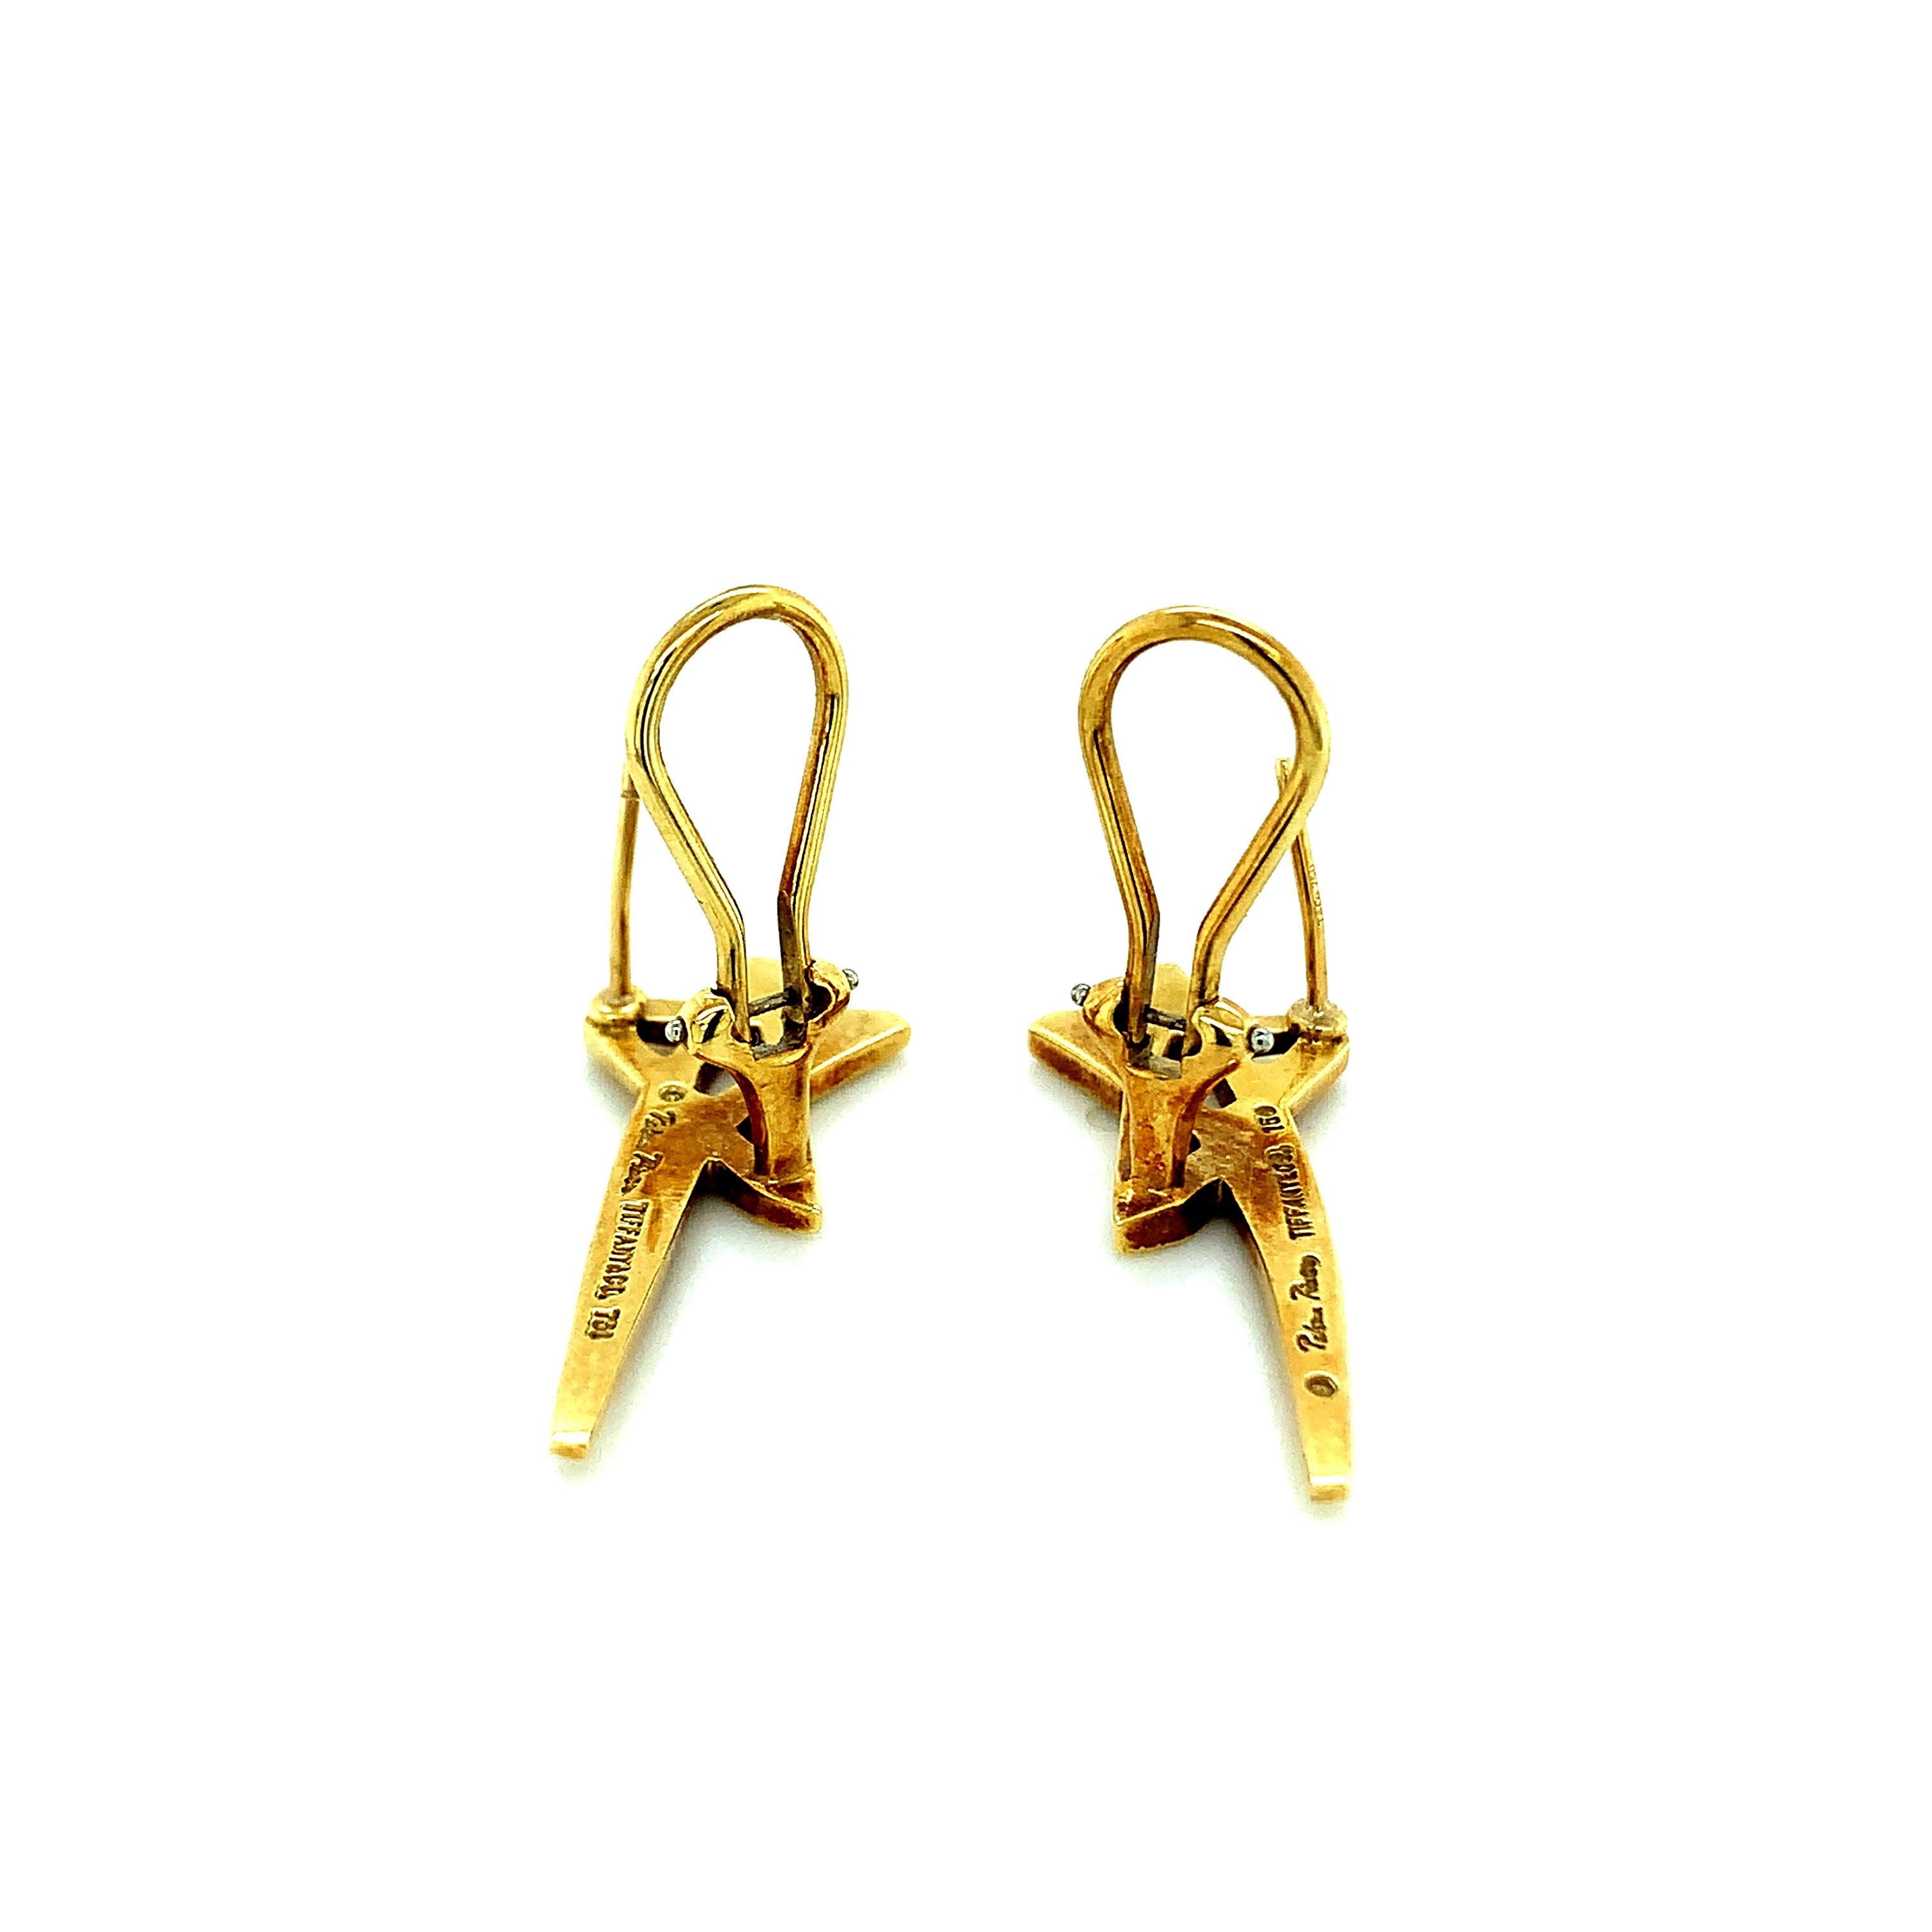 Paloma Picasso for Tiffany & Co. 18 karat yellow gold earrings featuring star motif. Marked: Paloma Picasso / Tiffany & Co. / 750. Total weight: 10.0 grams. Width: 1.2 cm. Length: 3.4 cm. 